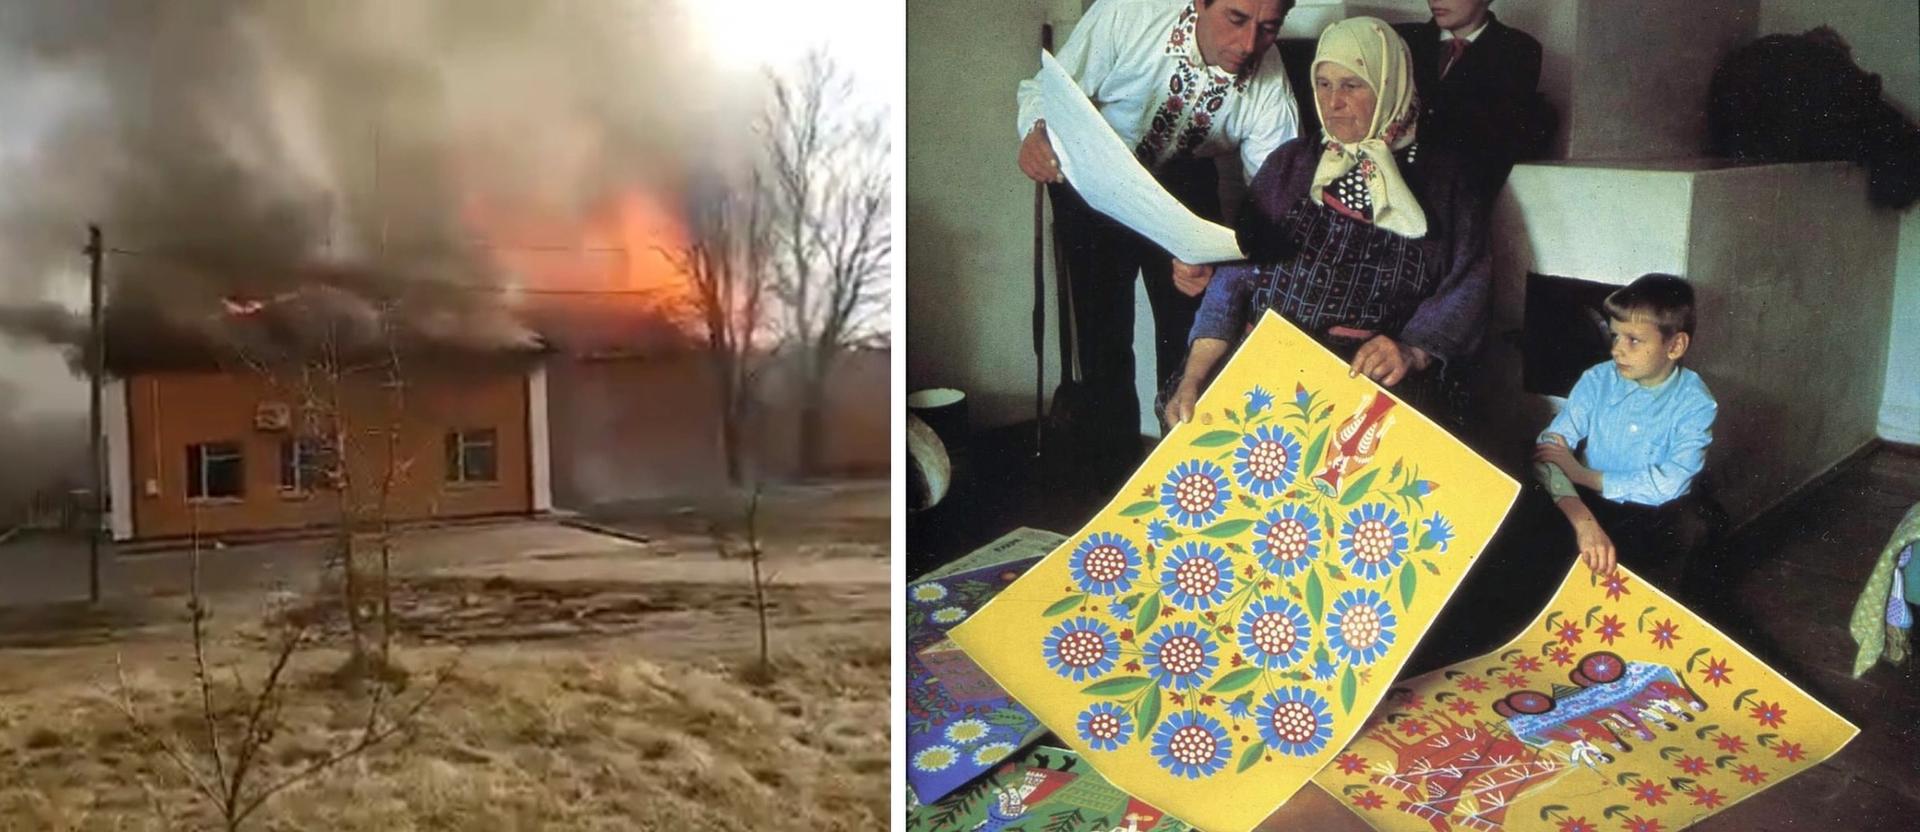 (L) Image from a video reportedly showing The Ivankiv Museum of Local History burning down. (R) Maria Prymachenko in 1970.